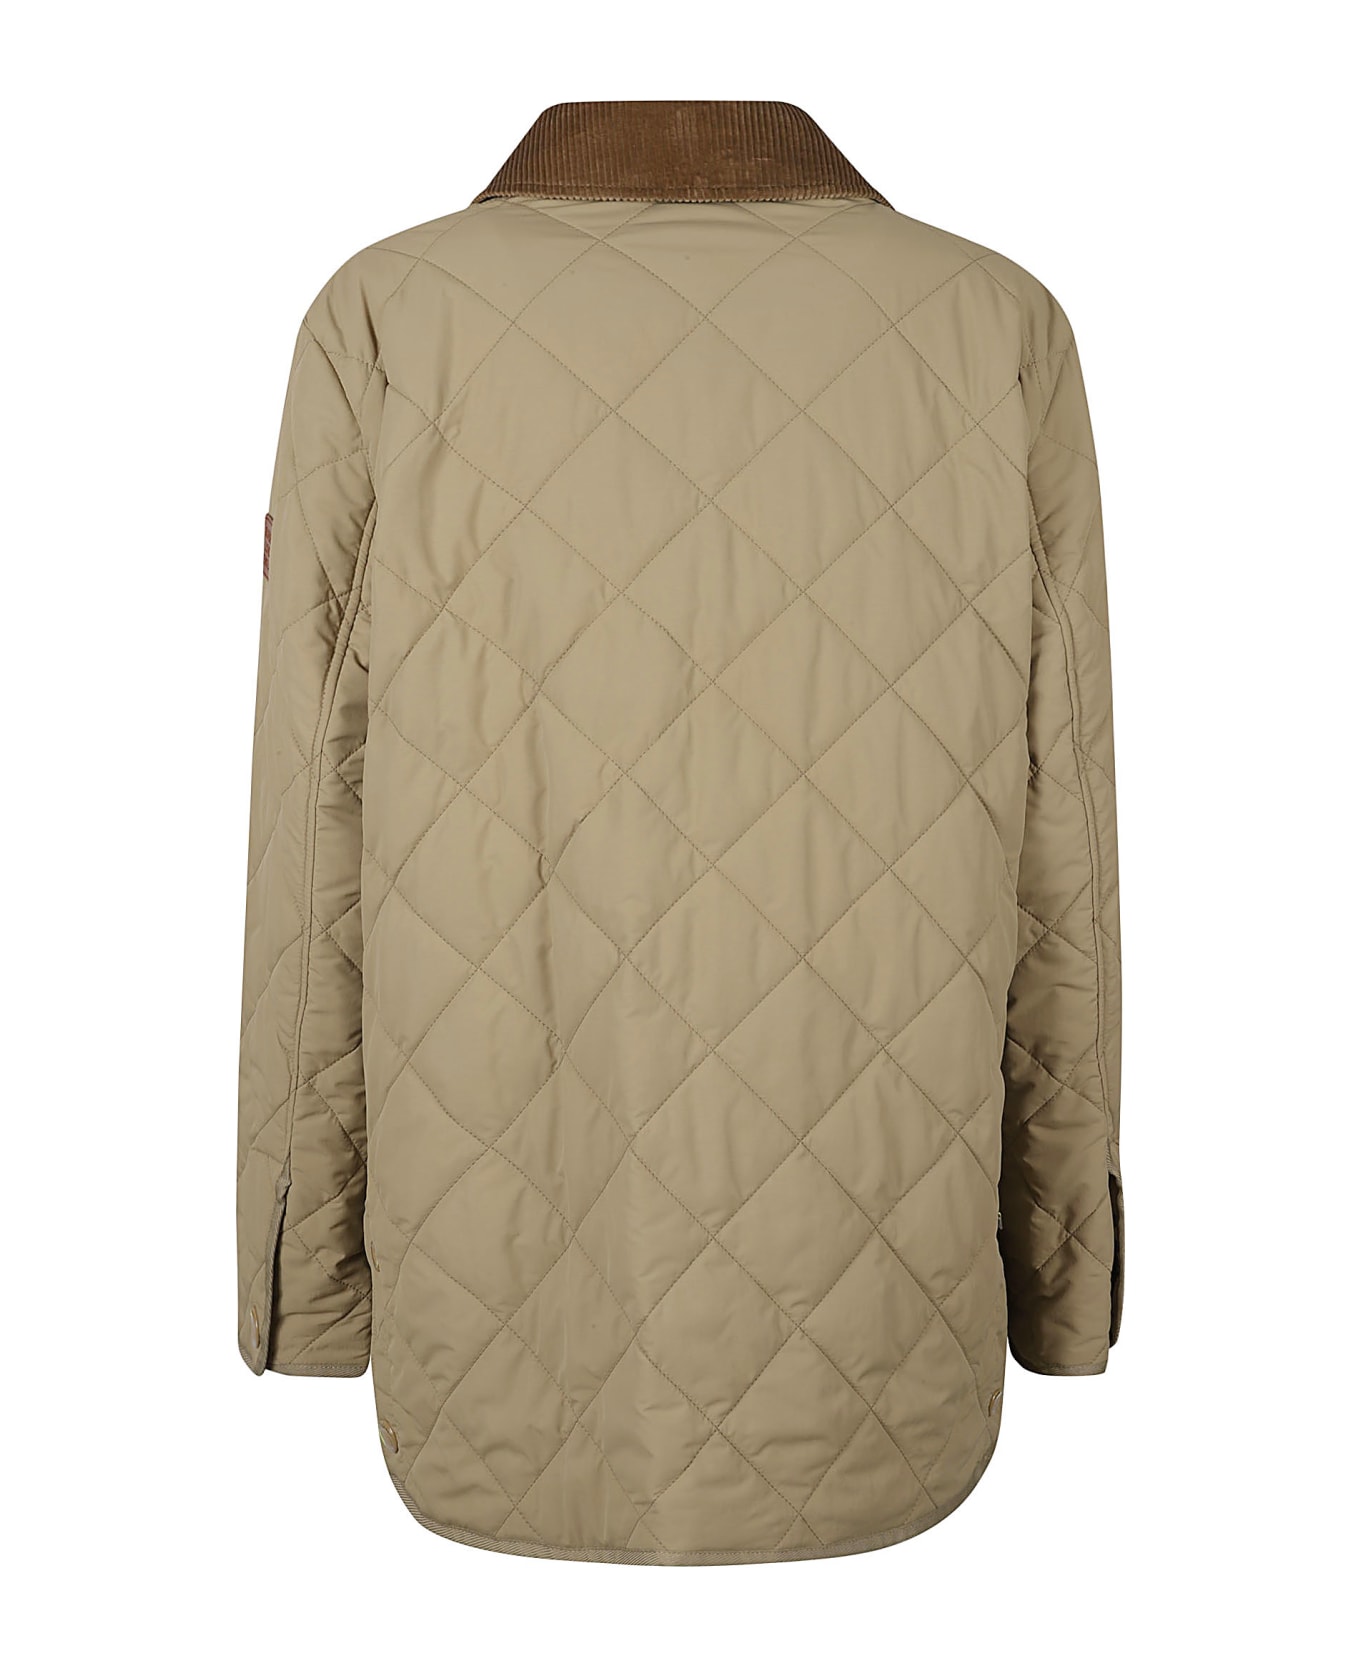 Burberry Quilted Down Jacket - Beige